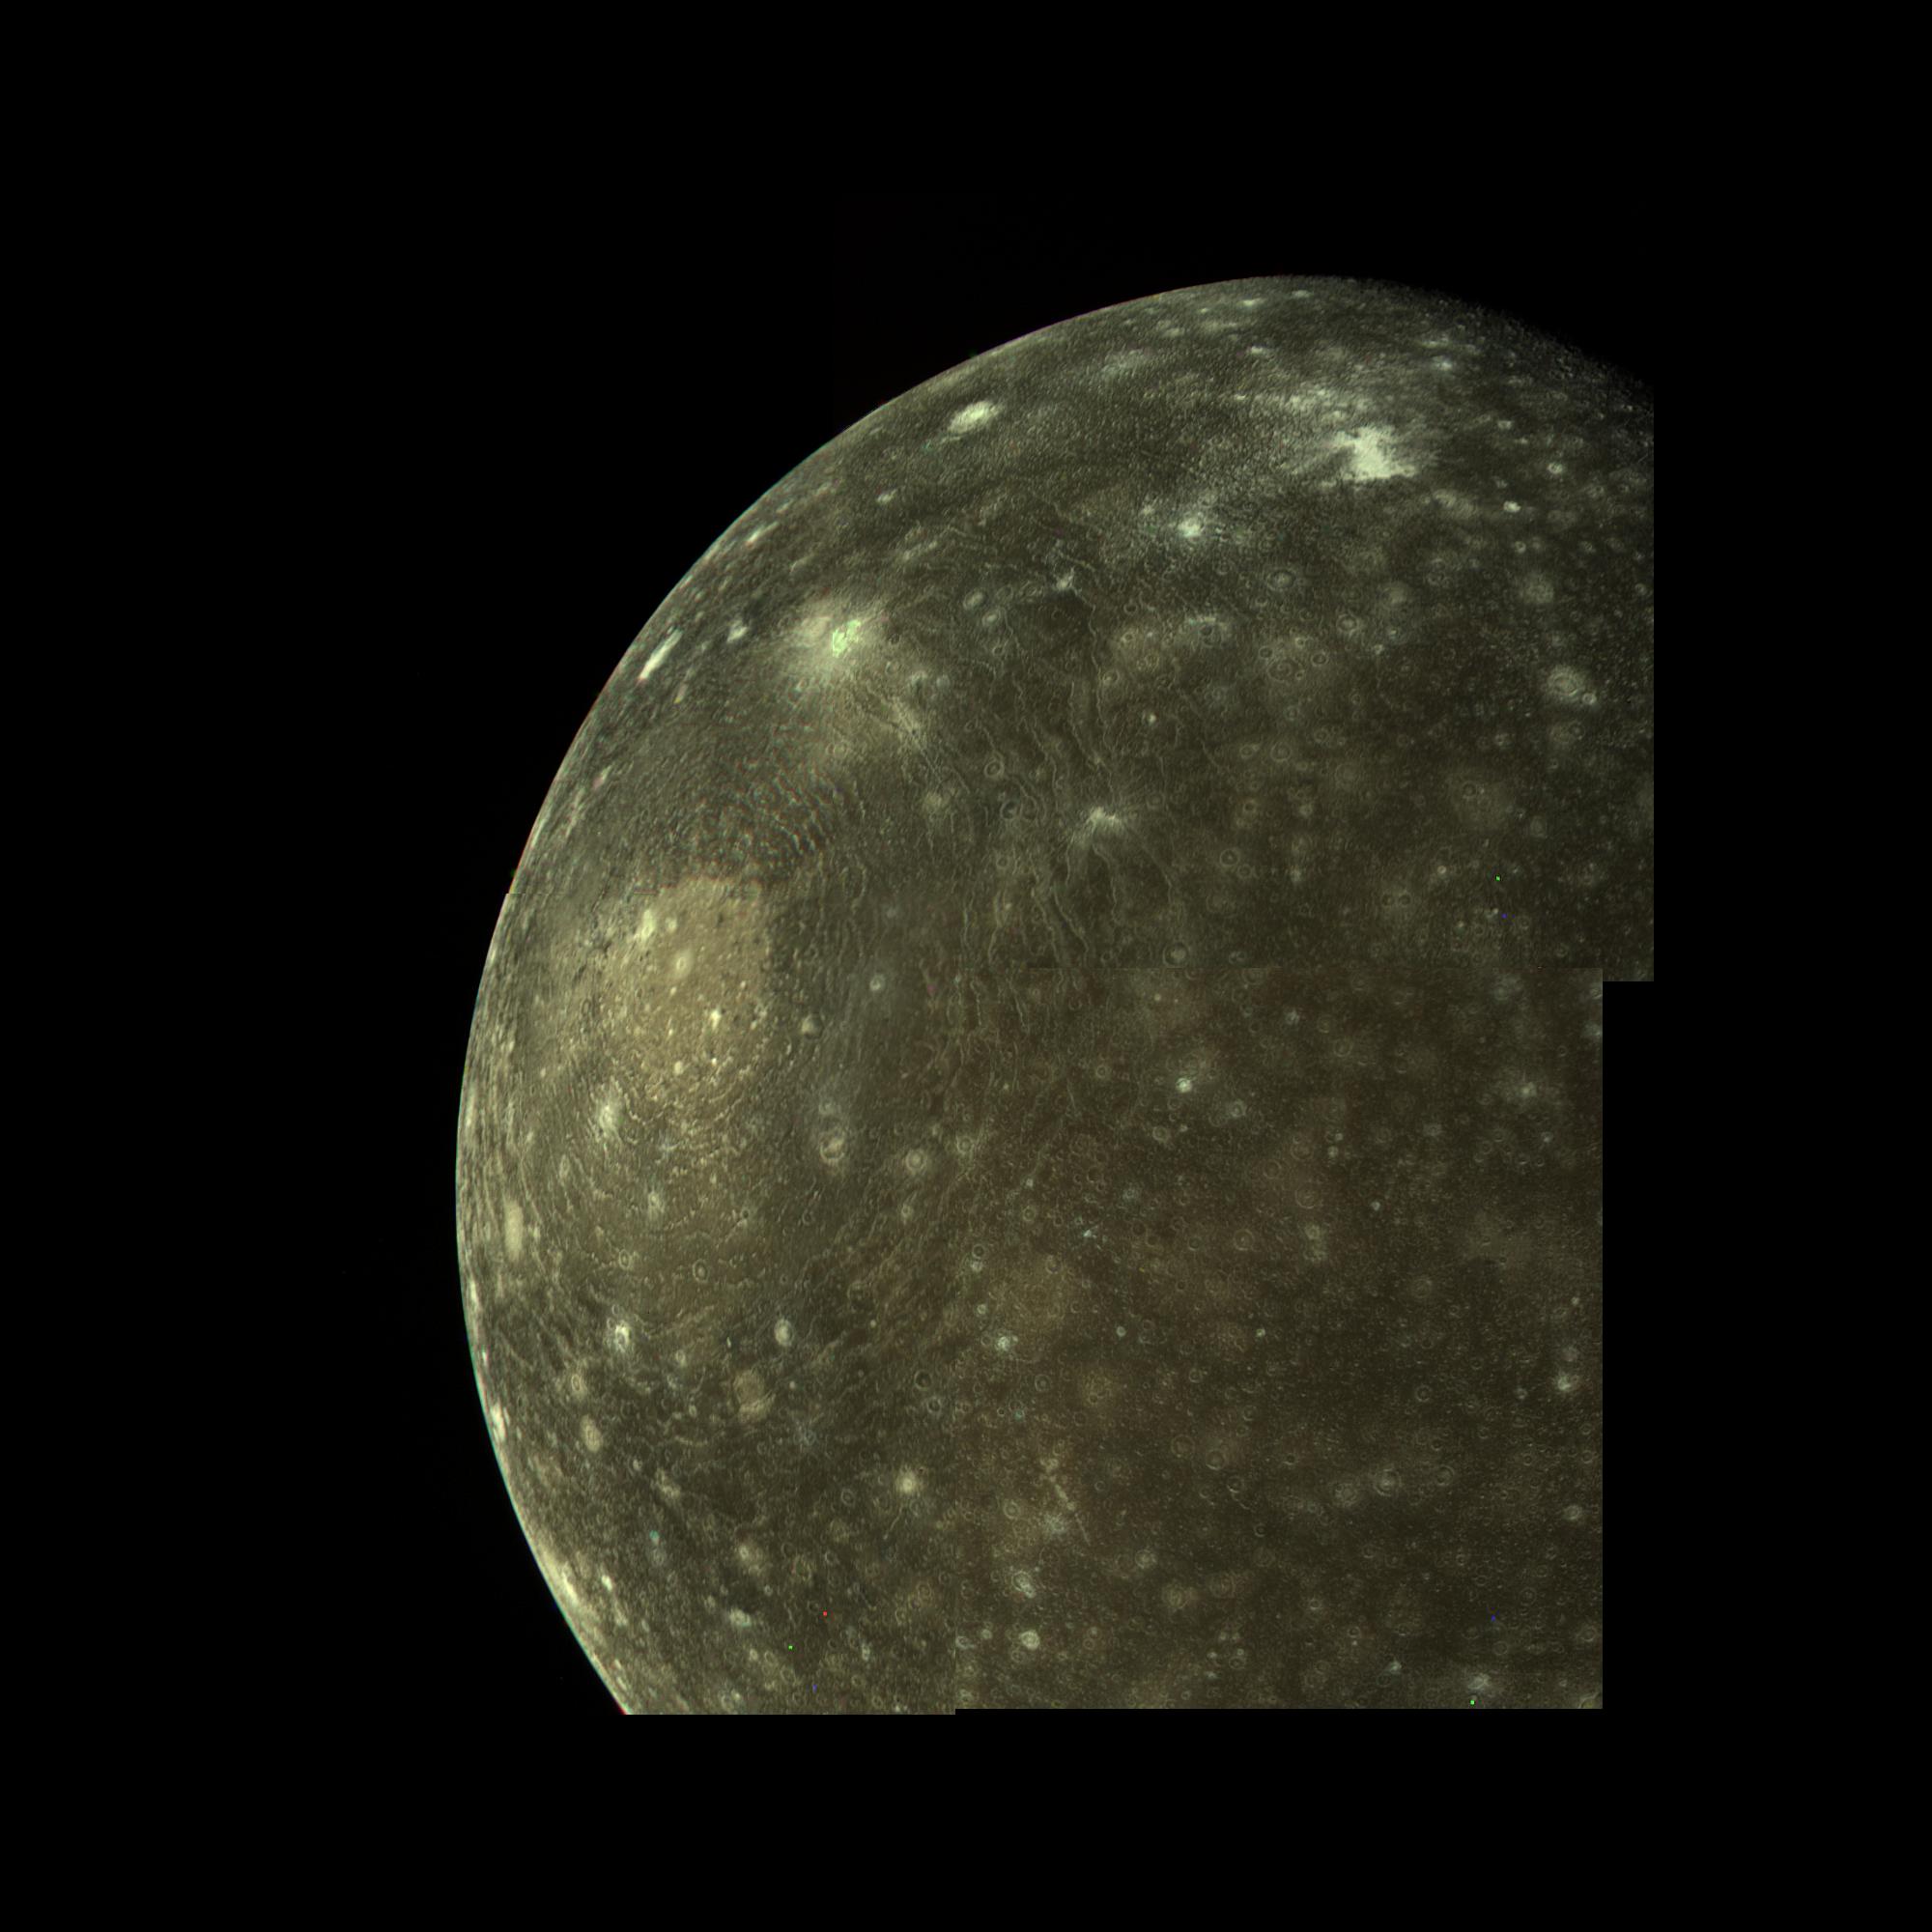 A close-up of most of Callisto focused on a giant impact structure with concentric rings radiation for miles from the center.